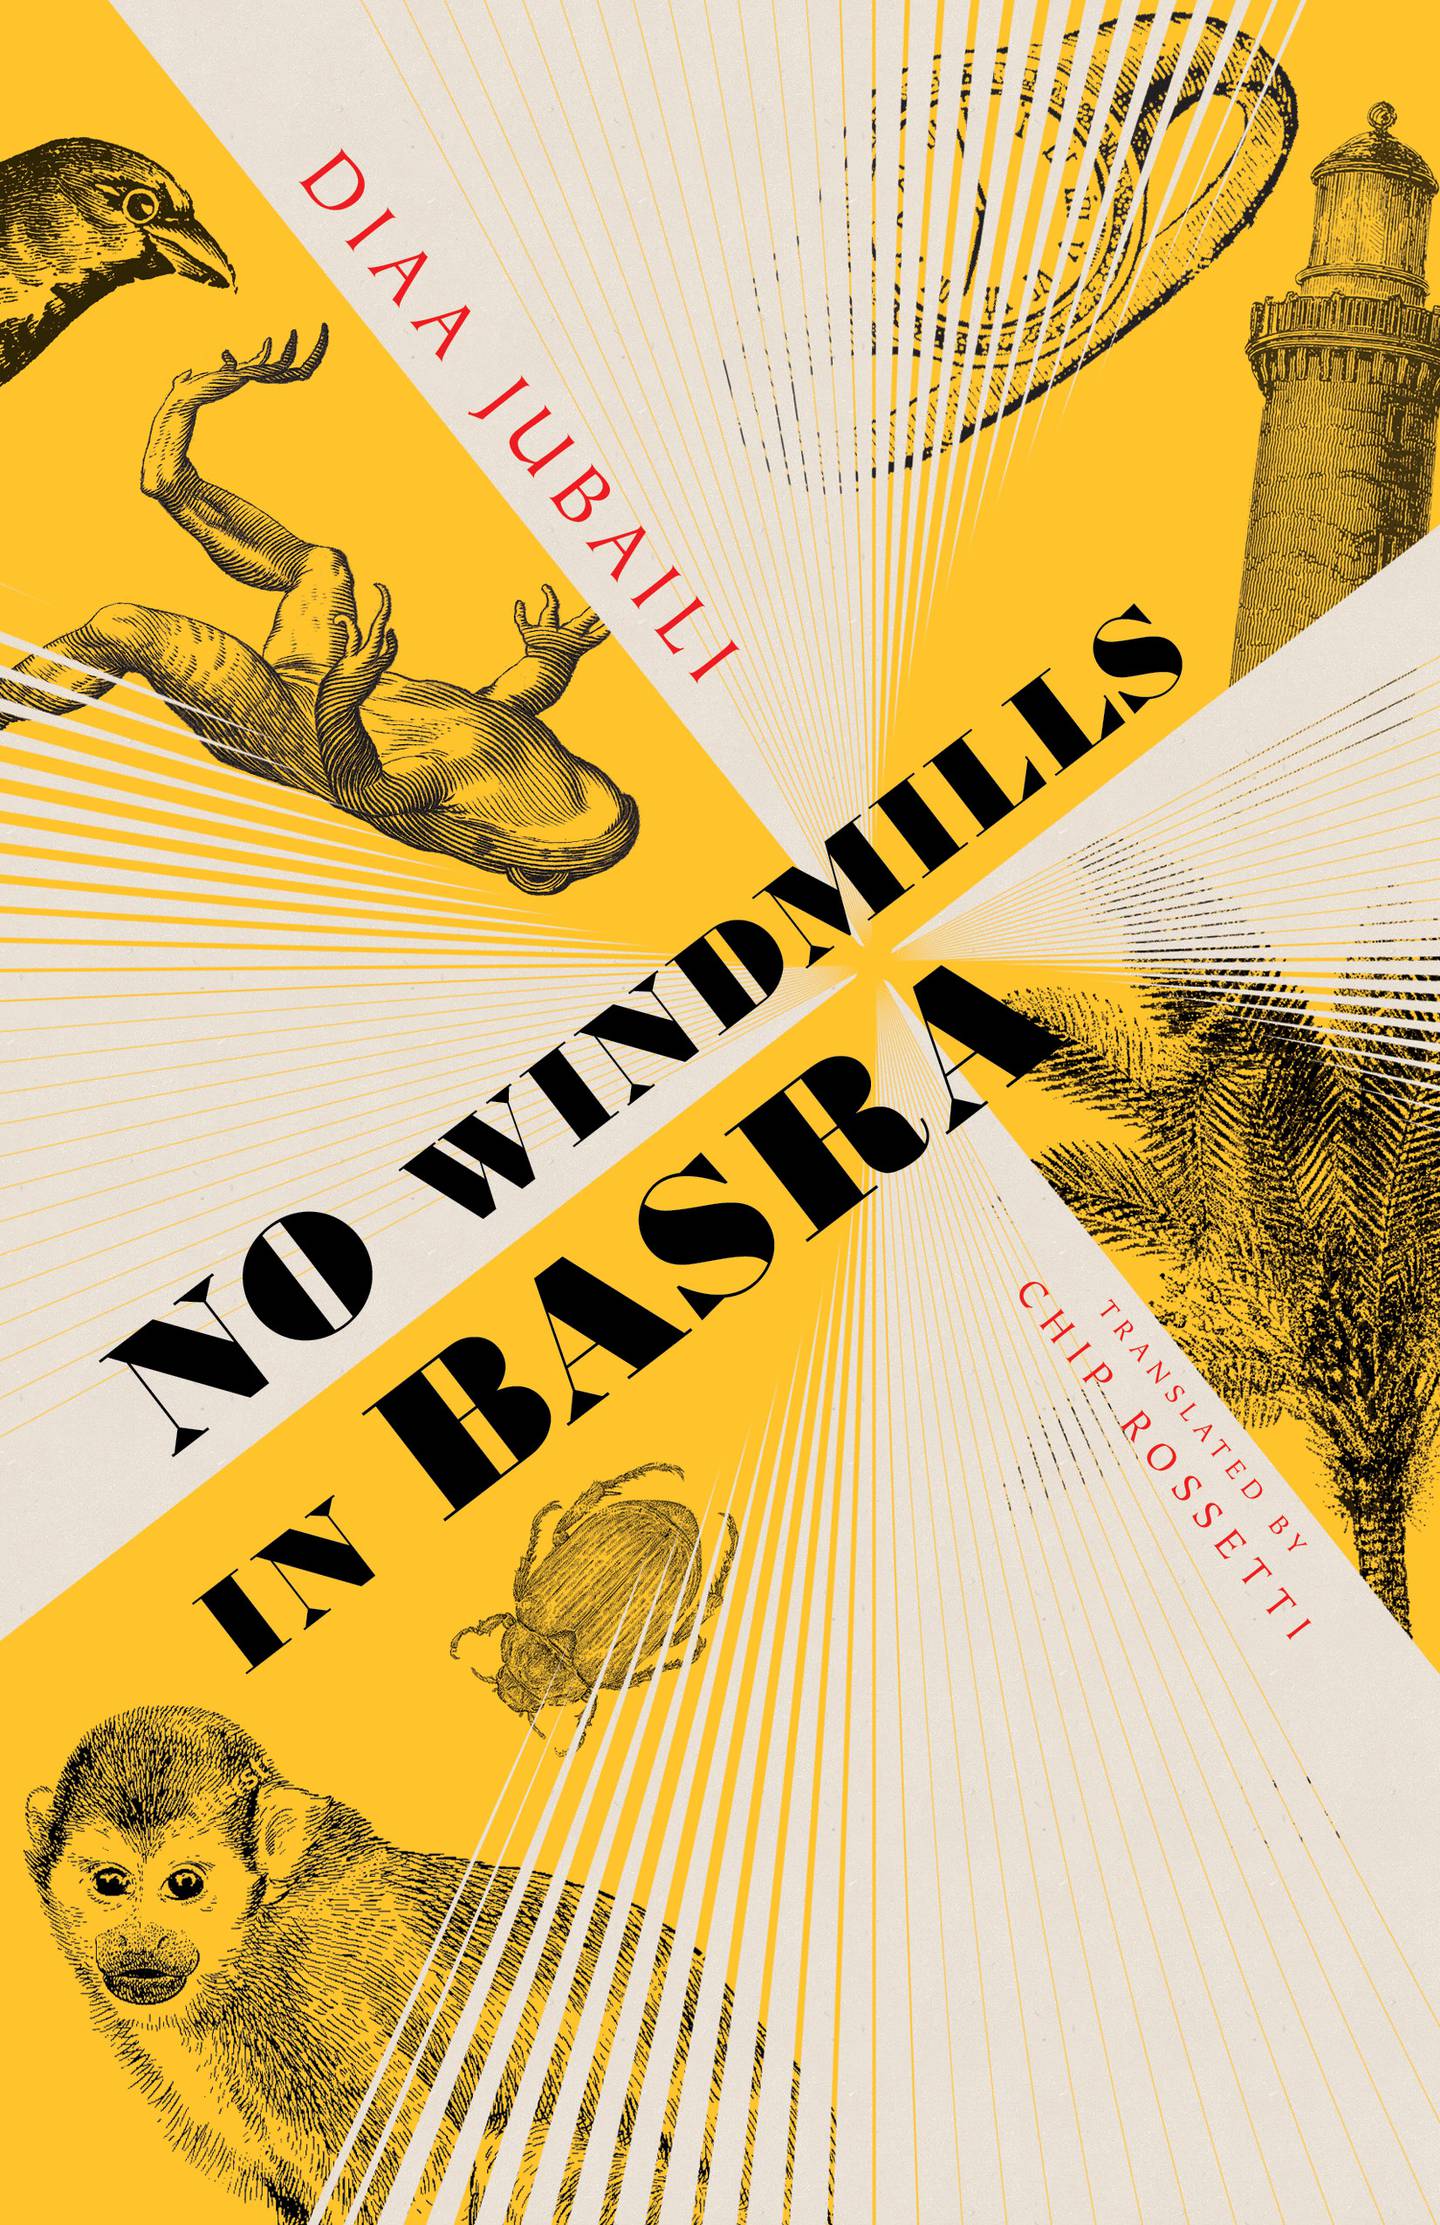 Originally published in Arabic in 2018, Diaa Jubaili's colllection of short stories, No Windmills in Basra has been translated into English. Photo: Deep Vellum Publishing